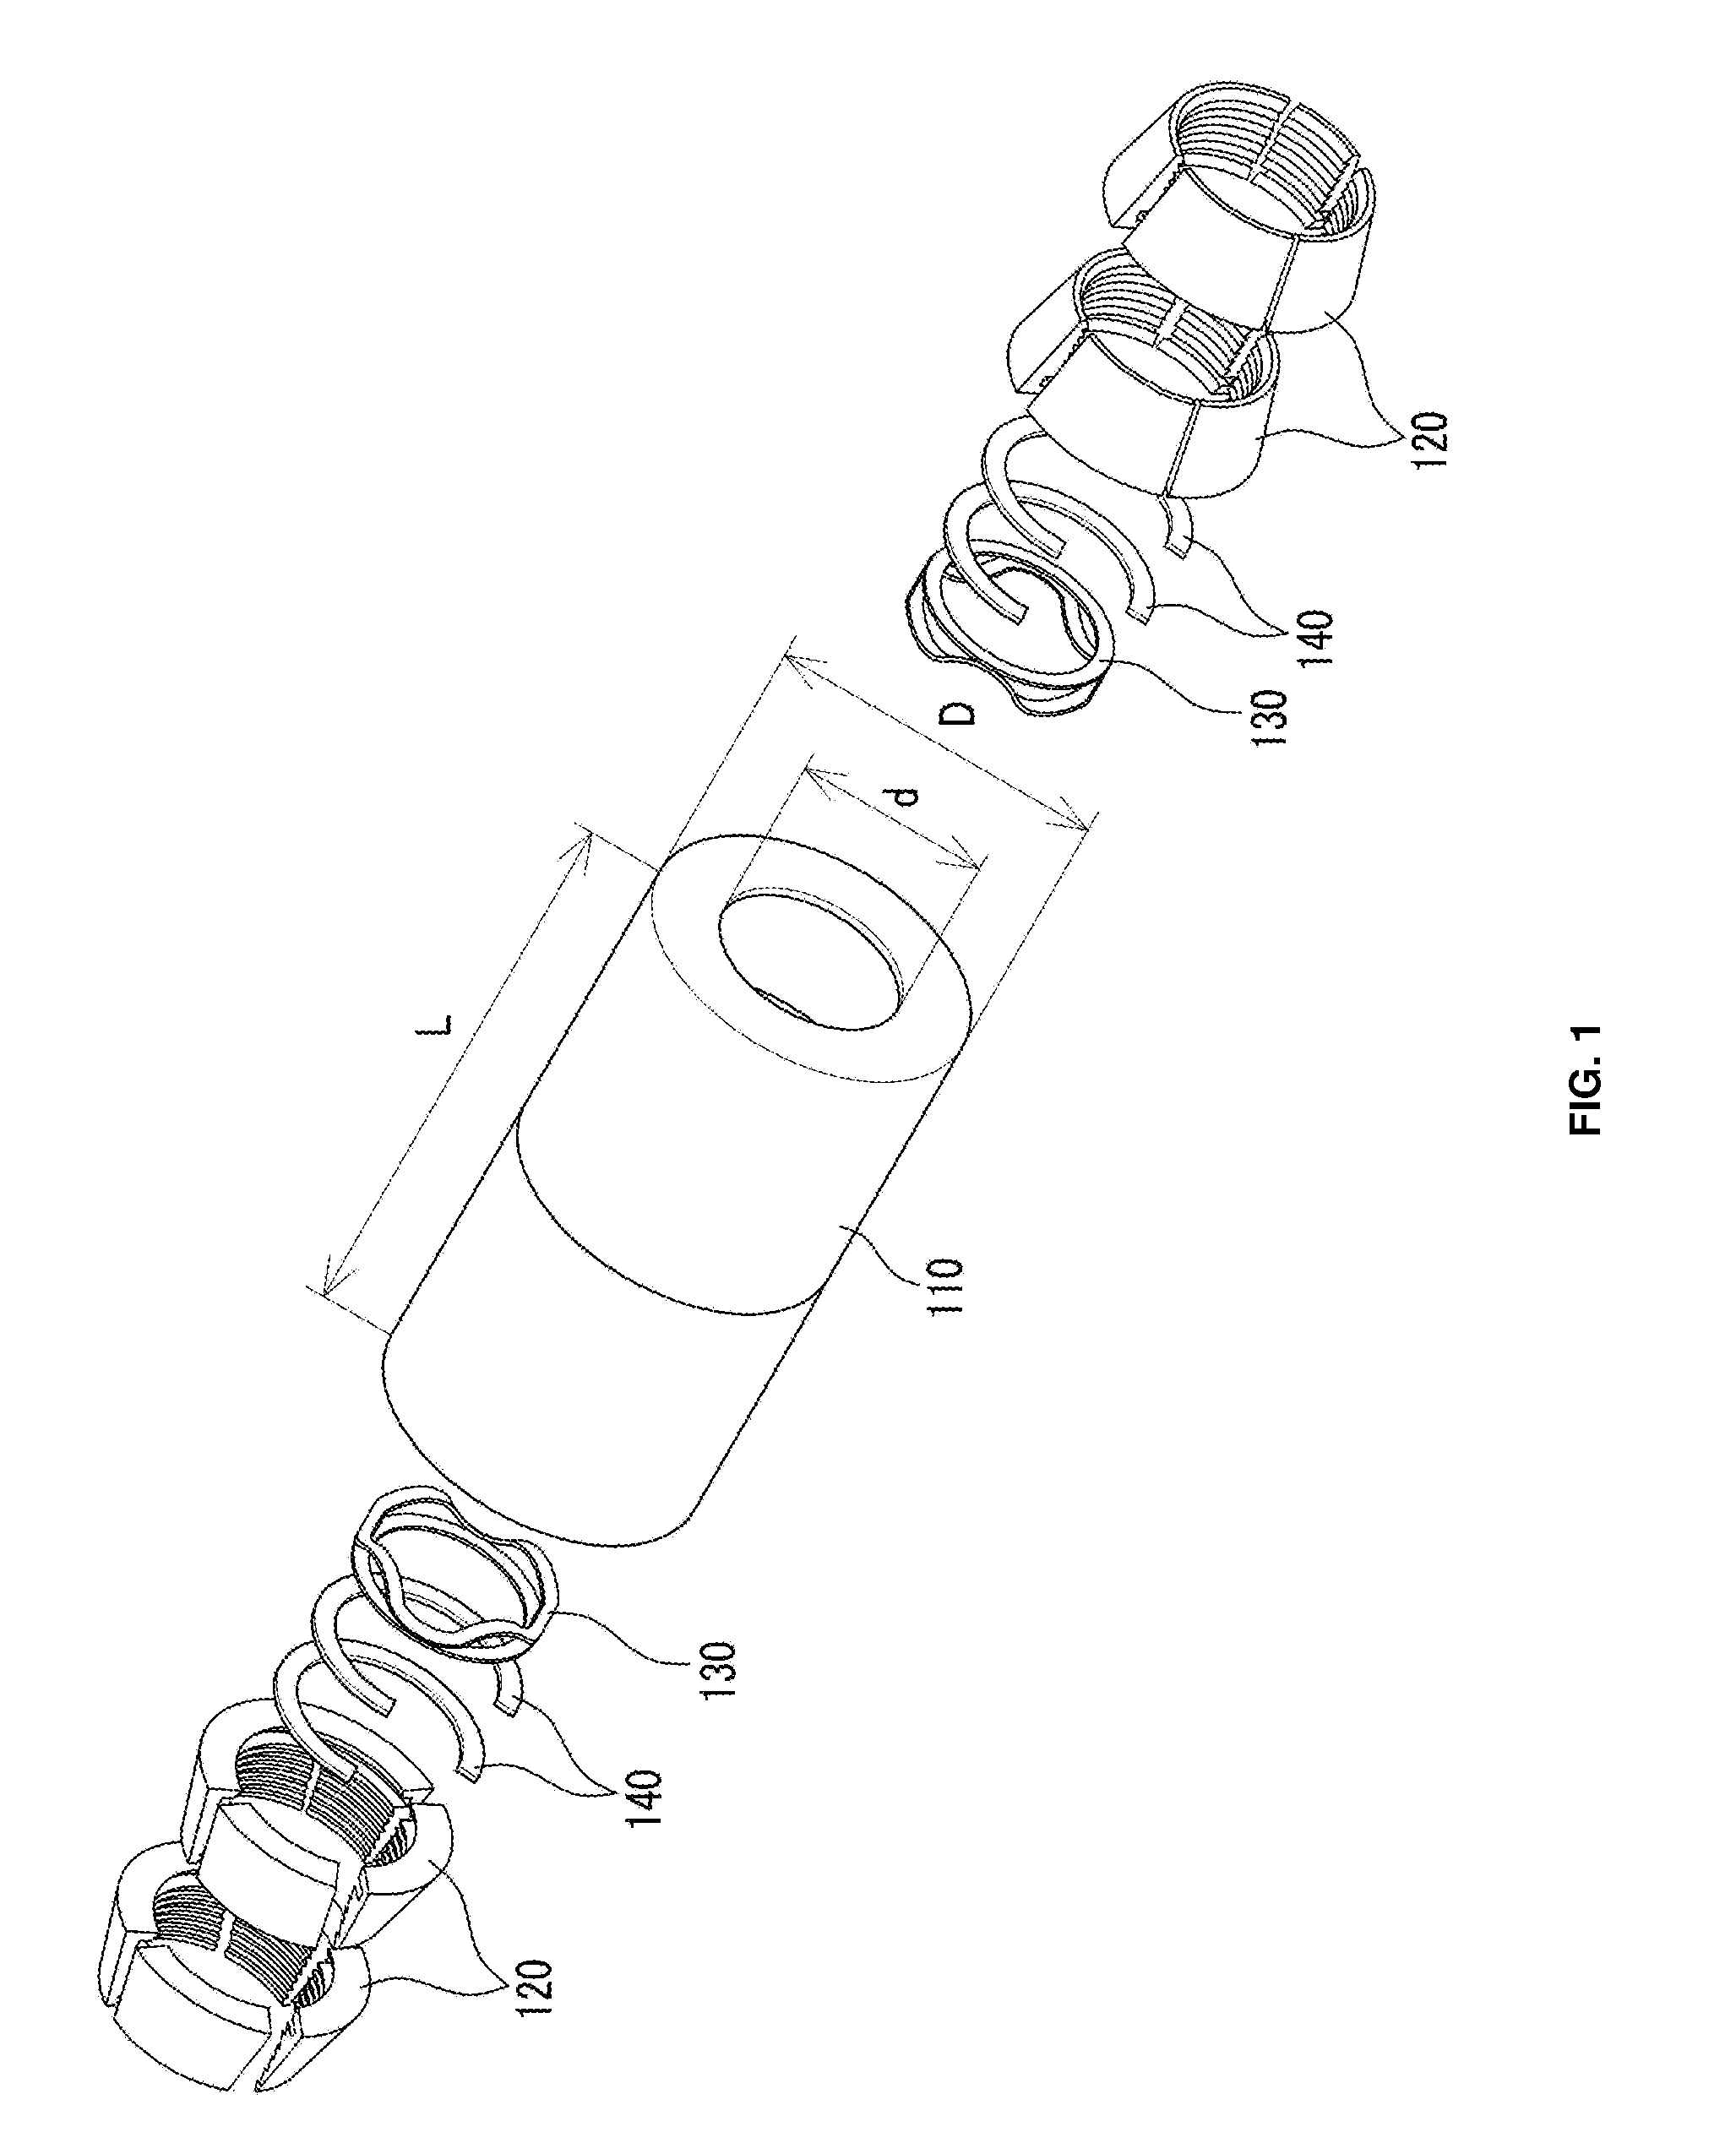 Apparatus for connecting bars